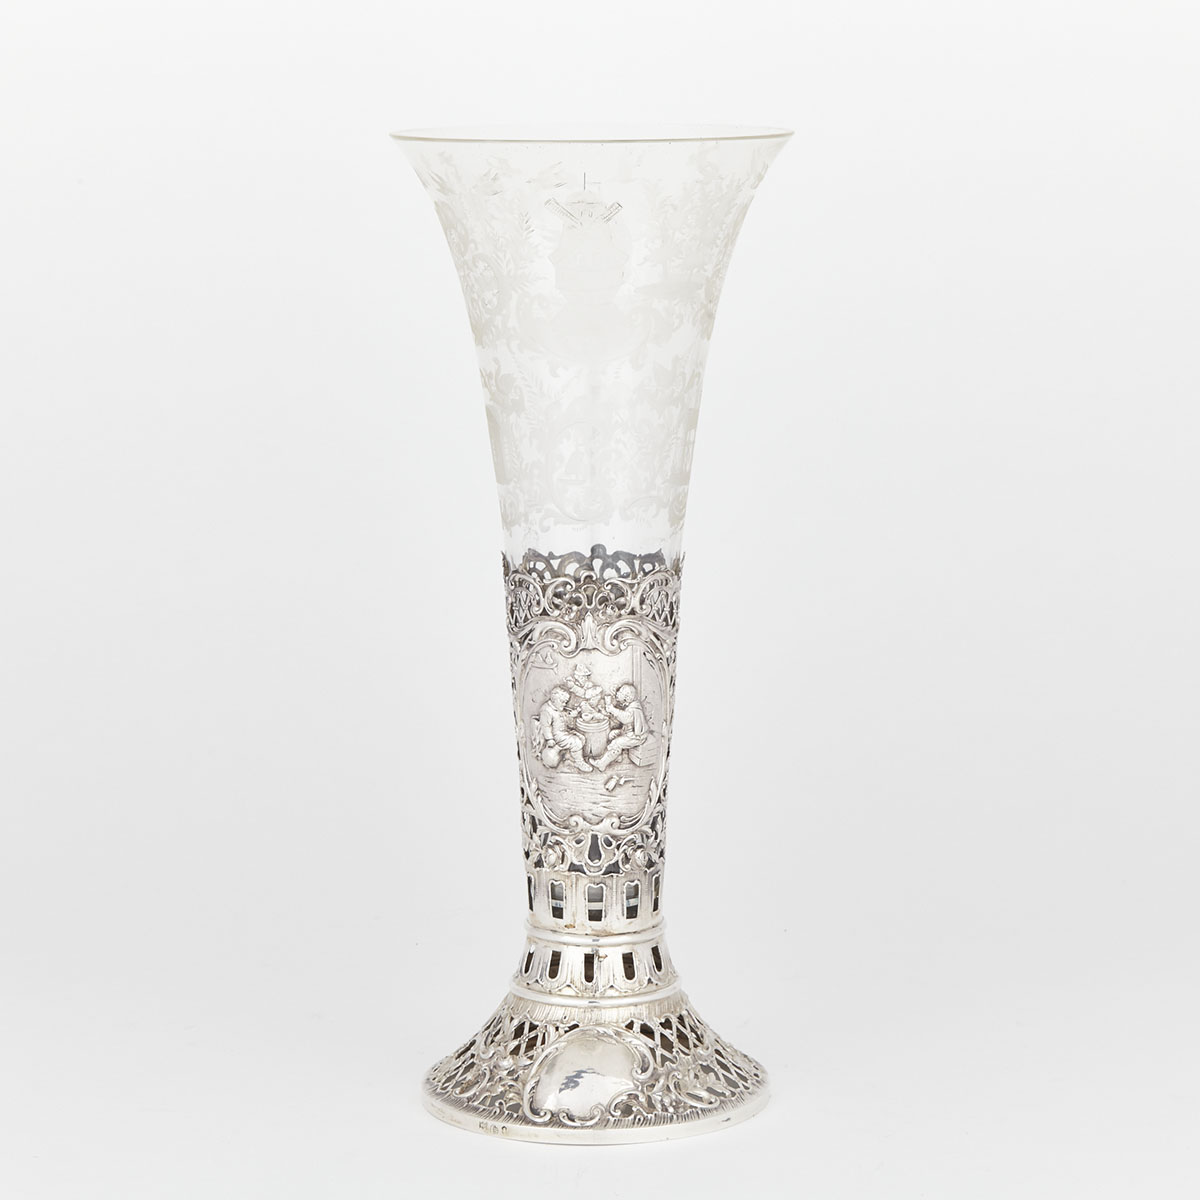 German Silver and Etched Glass Vase, Georg Roth & Co., Hanau, c.1900